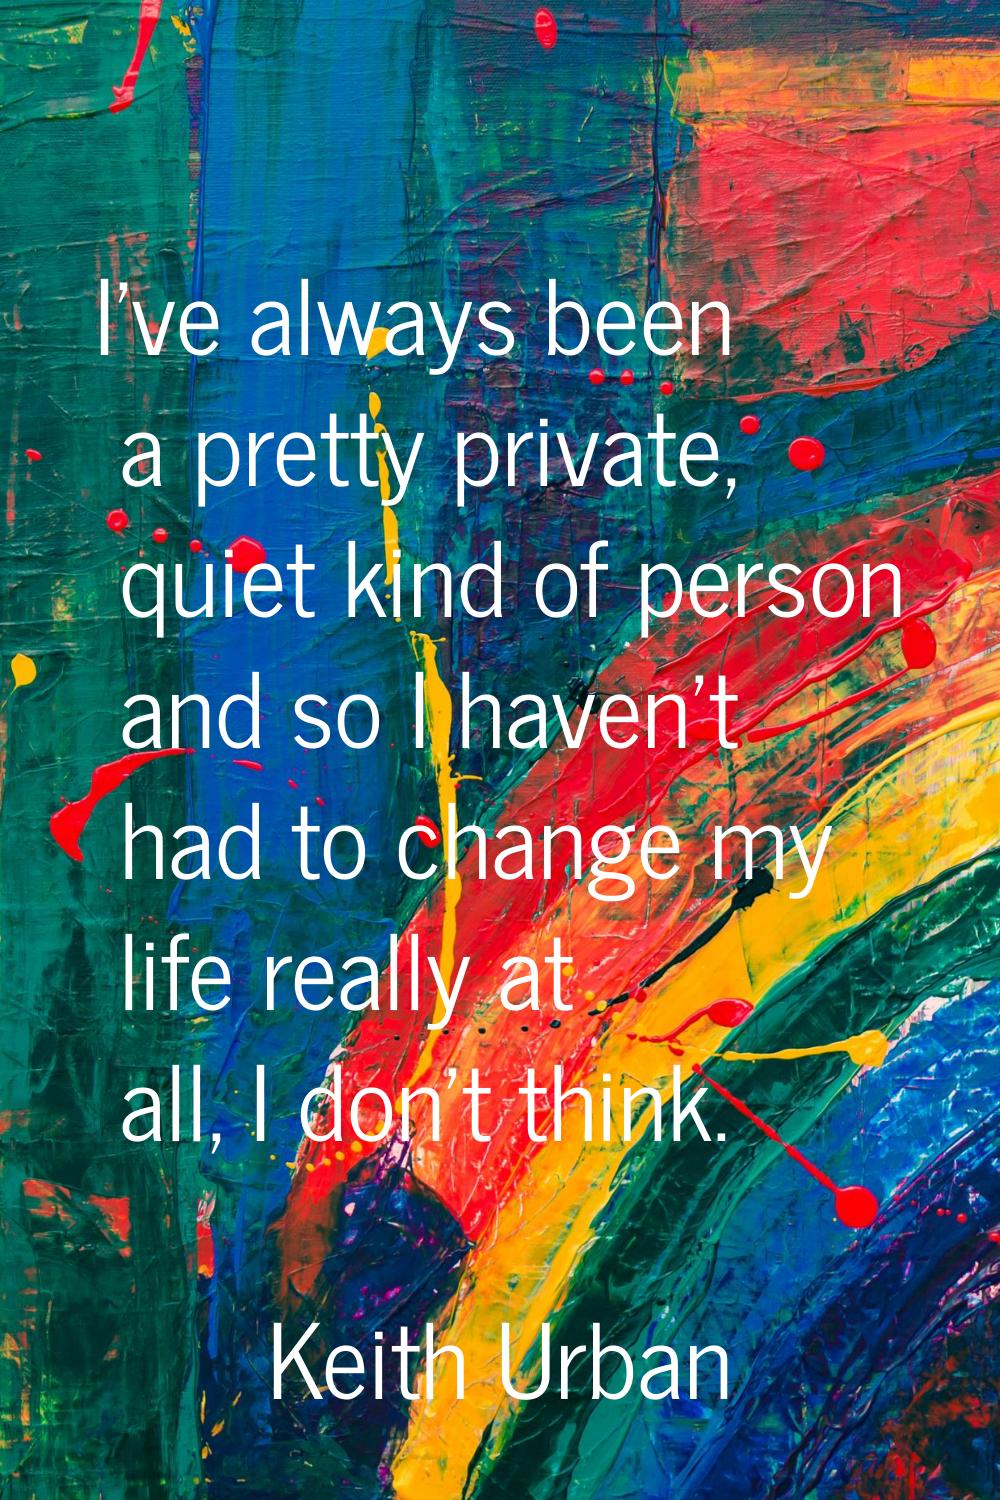 I've always been a pretty private, quiet kind of person and so I haven't had to change my life real